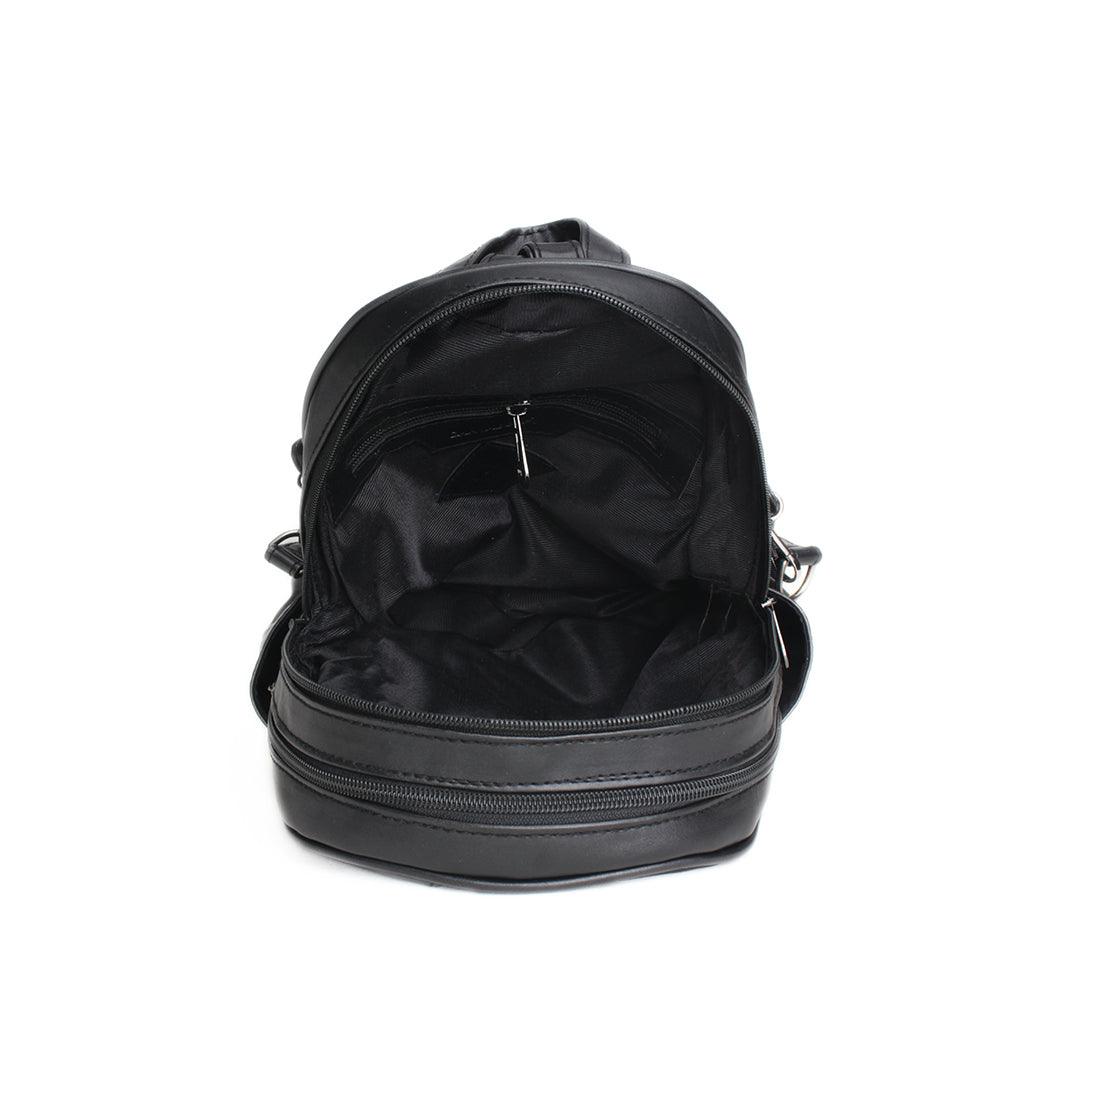 Black Mixed Backpack Bloom - CANVAEGYPT